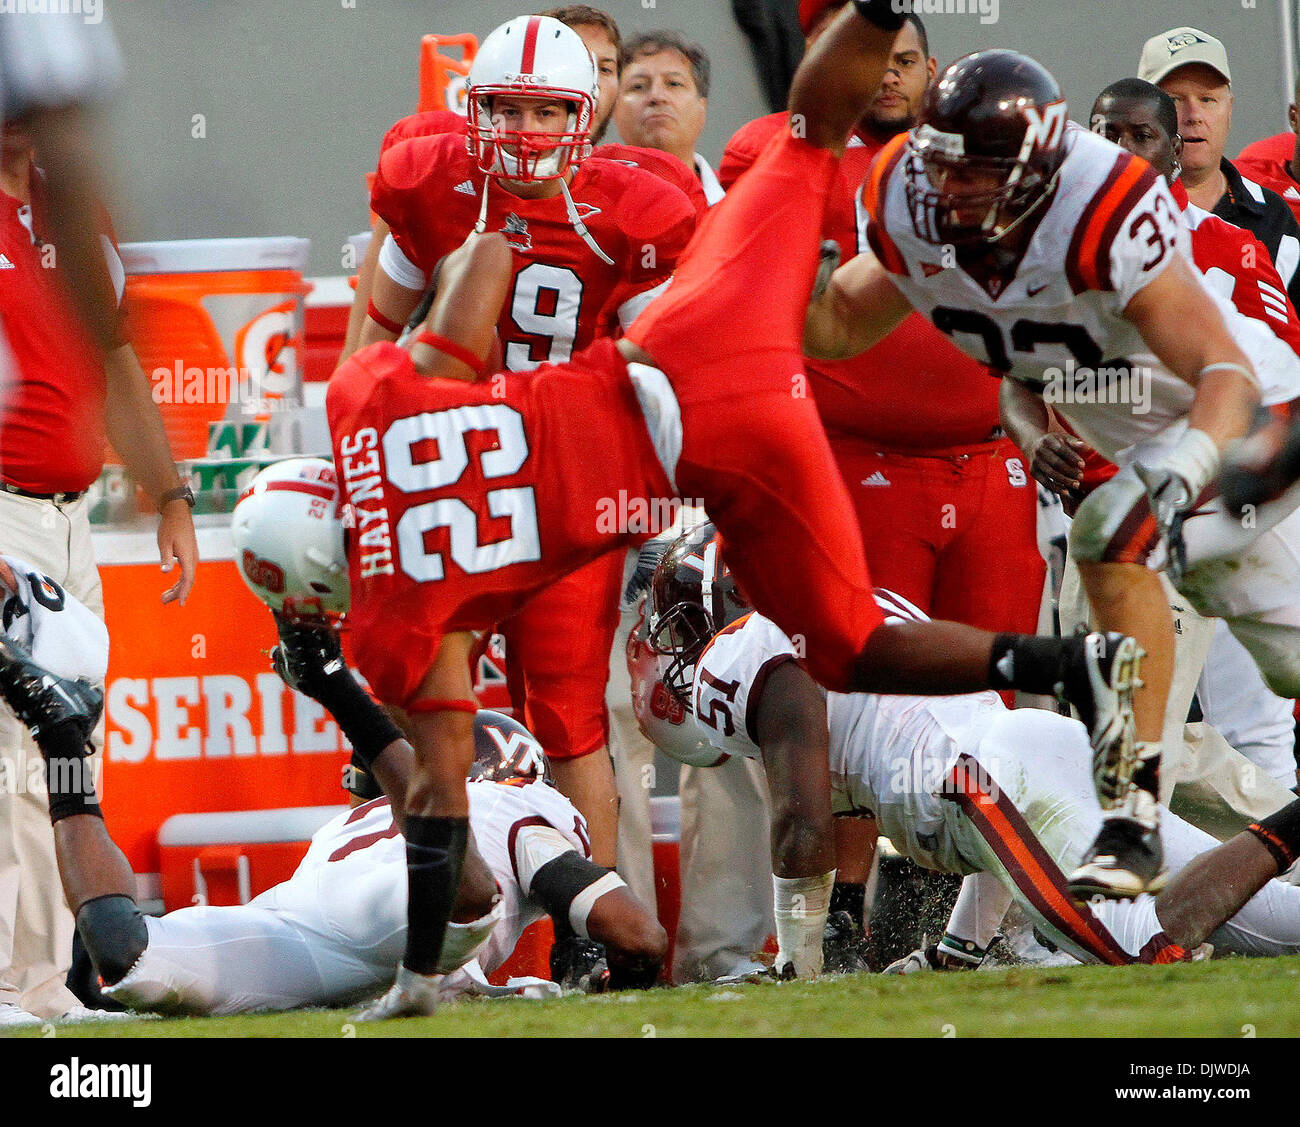 Oct. 2, 2010 - Raleigh, Carter-Finley Stadium, U.S - NC State halfback Dean Haynes (#29) is upended by the Virginia Tech defense as the Hokies defeat NC State leads 41-30 at Carter-Finley stadium in Raleigh, North Carolina. (Credit Image: © Jack Tarr/Southcreek Global/ZUMApress.com) Stock Photo